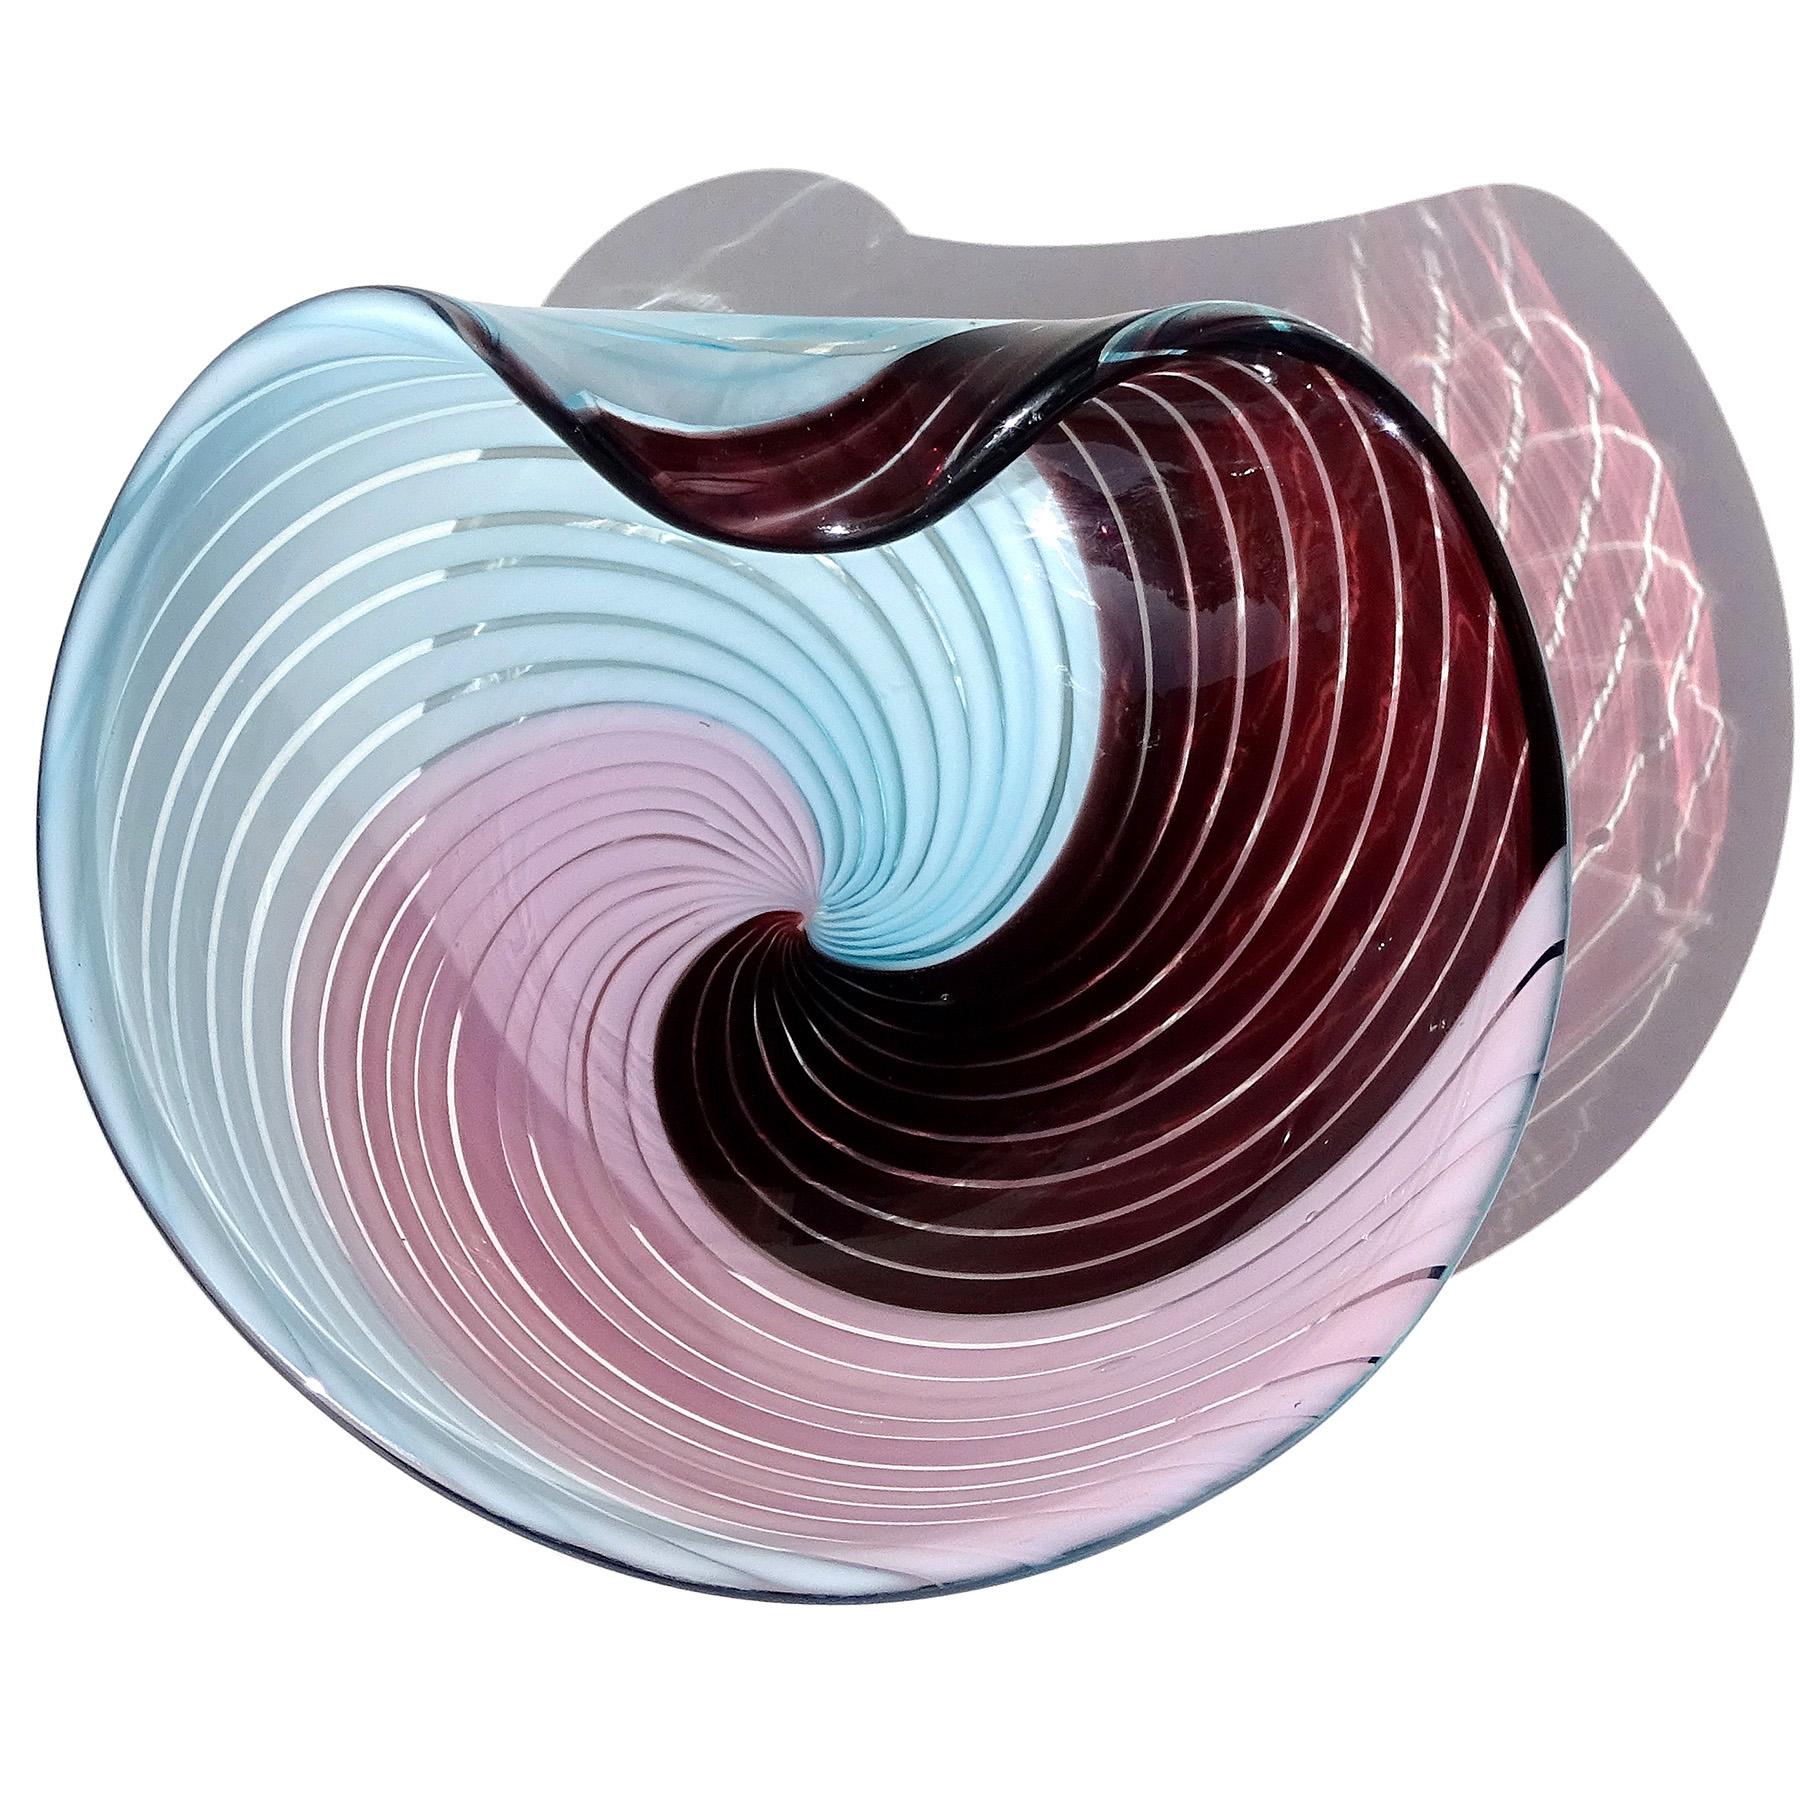 Beautiful and rare, vintage Murano hand blown pink, sky blue, dark purple ribbons Italian art glass decorative bowl. Created in the manner of designer Dino Martens for Aureliano Toso. The piece has an optic swirl pattern in alternating colors, with